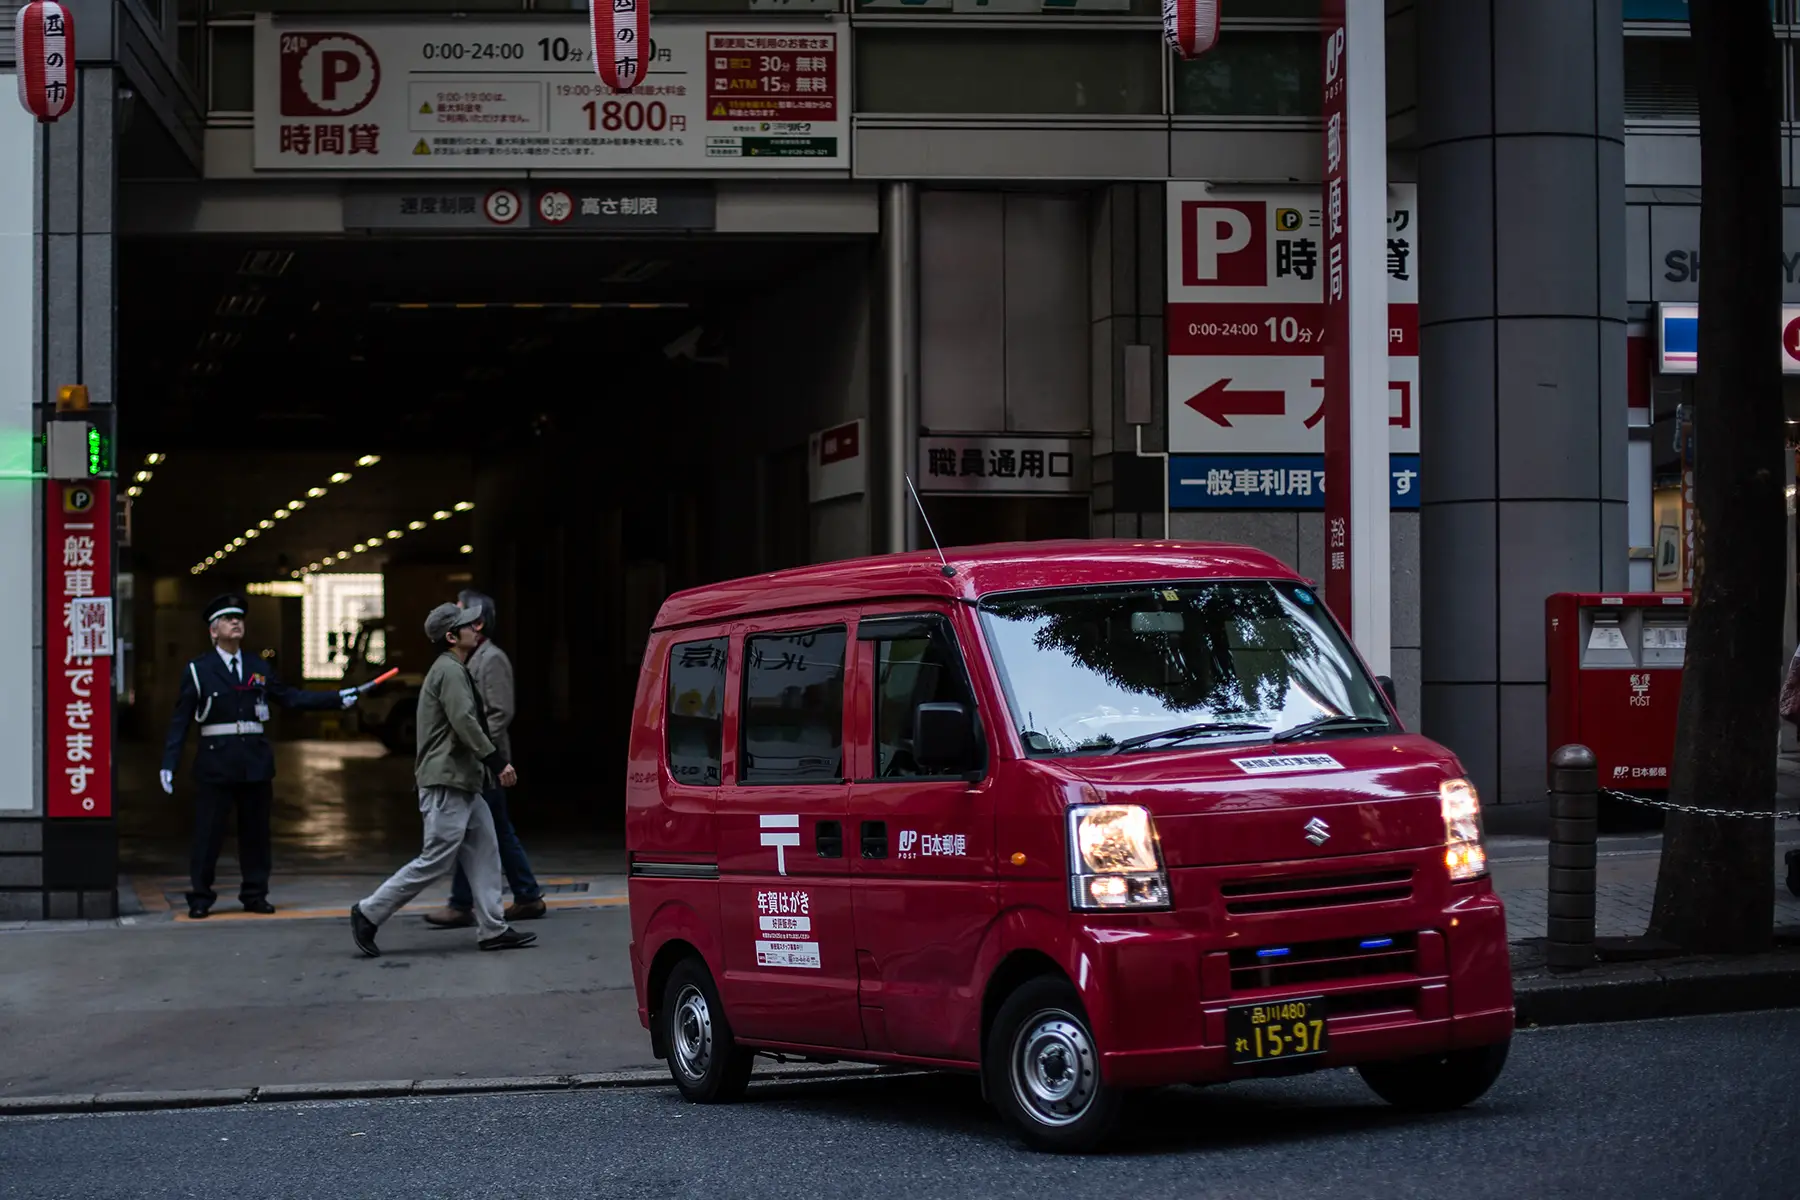 A red mail van leaving a post office center